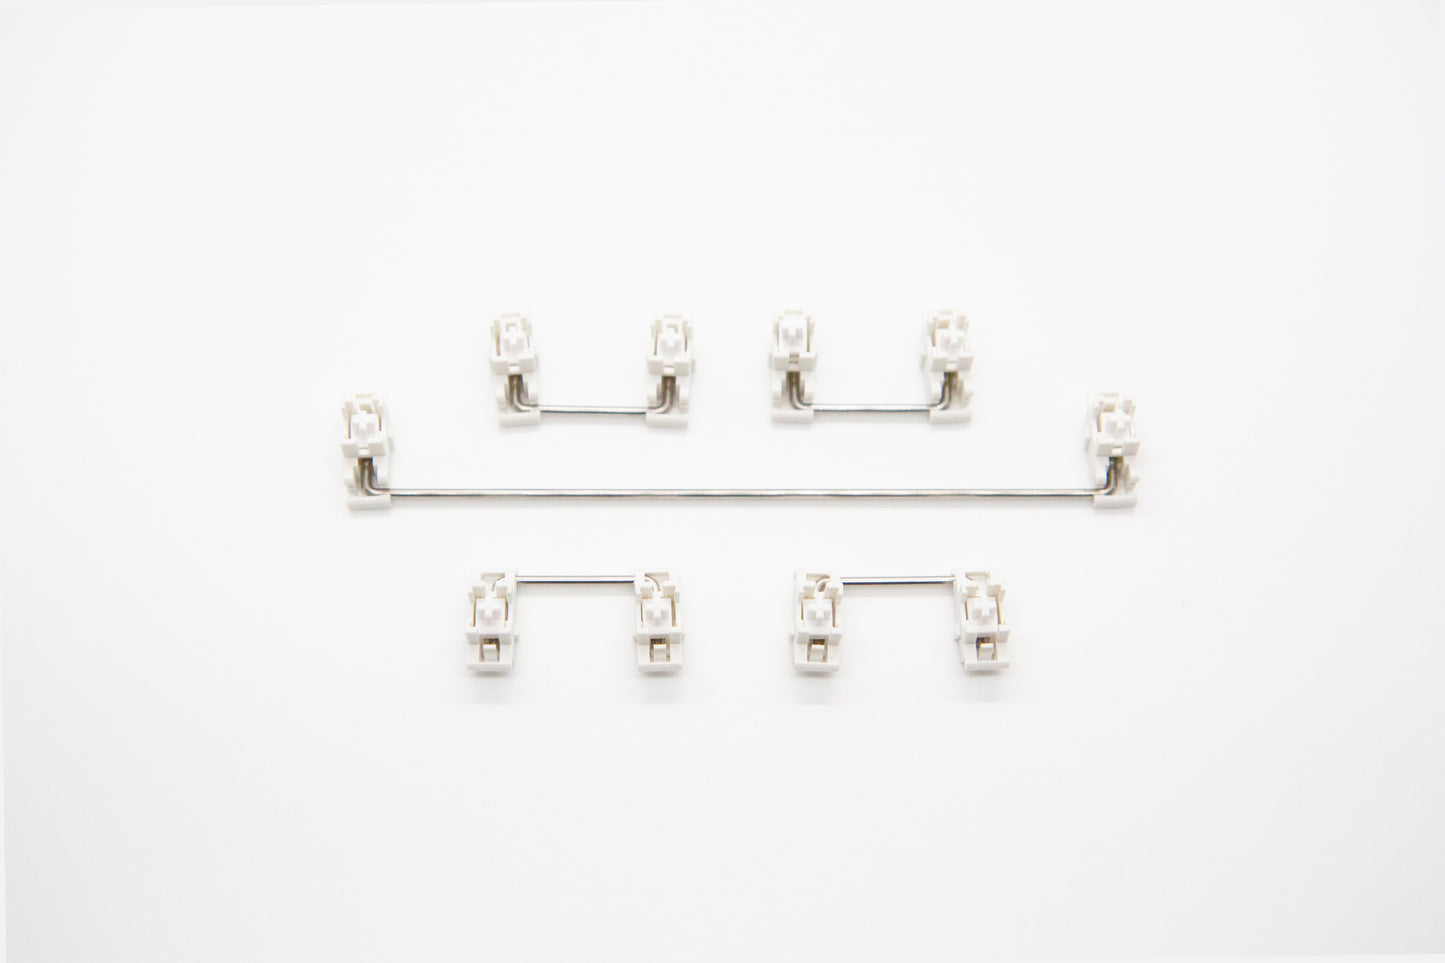 Overhead shot of PCB mounted white mechanical keyboard Durock stabilizer kit in 7u configuration with screws and washers